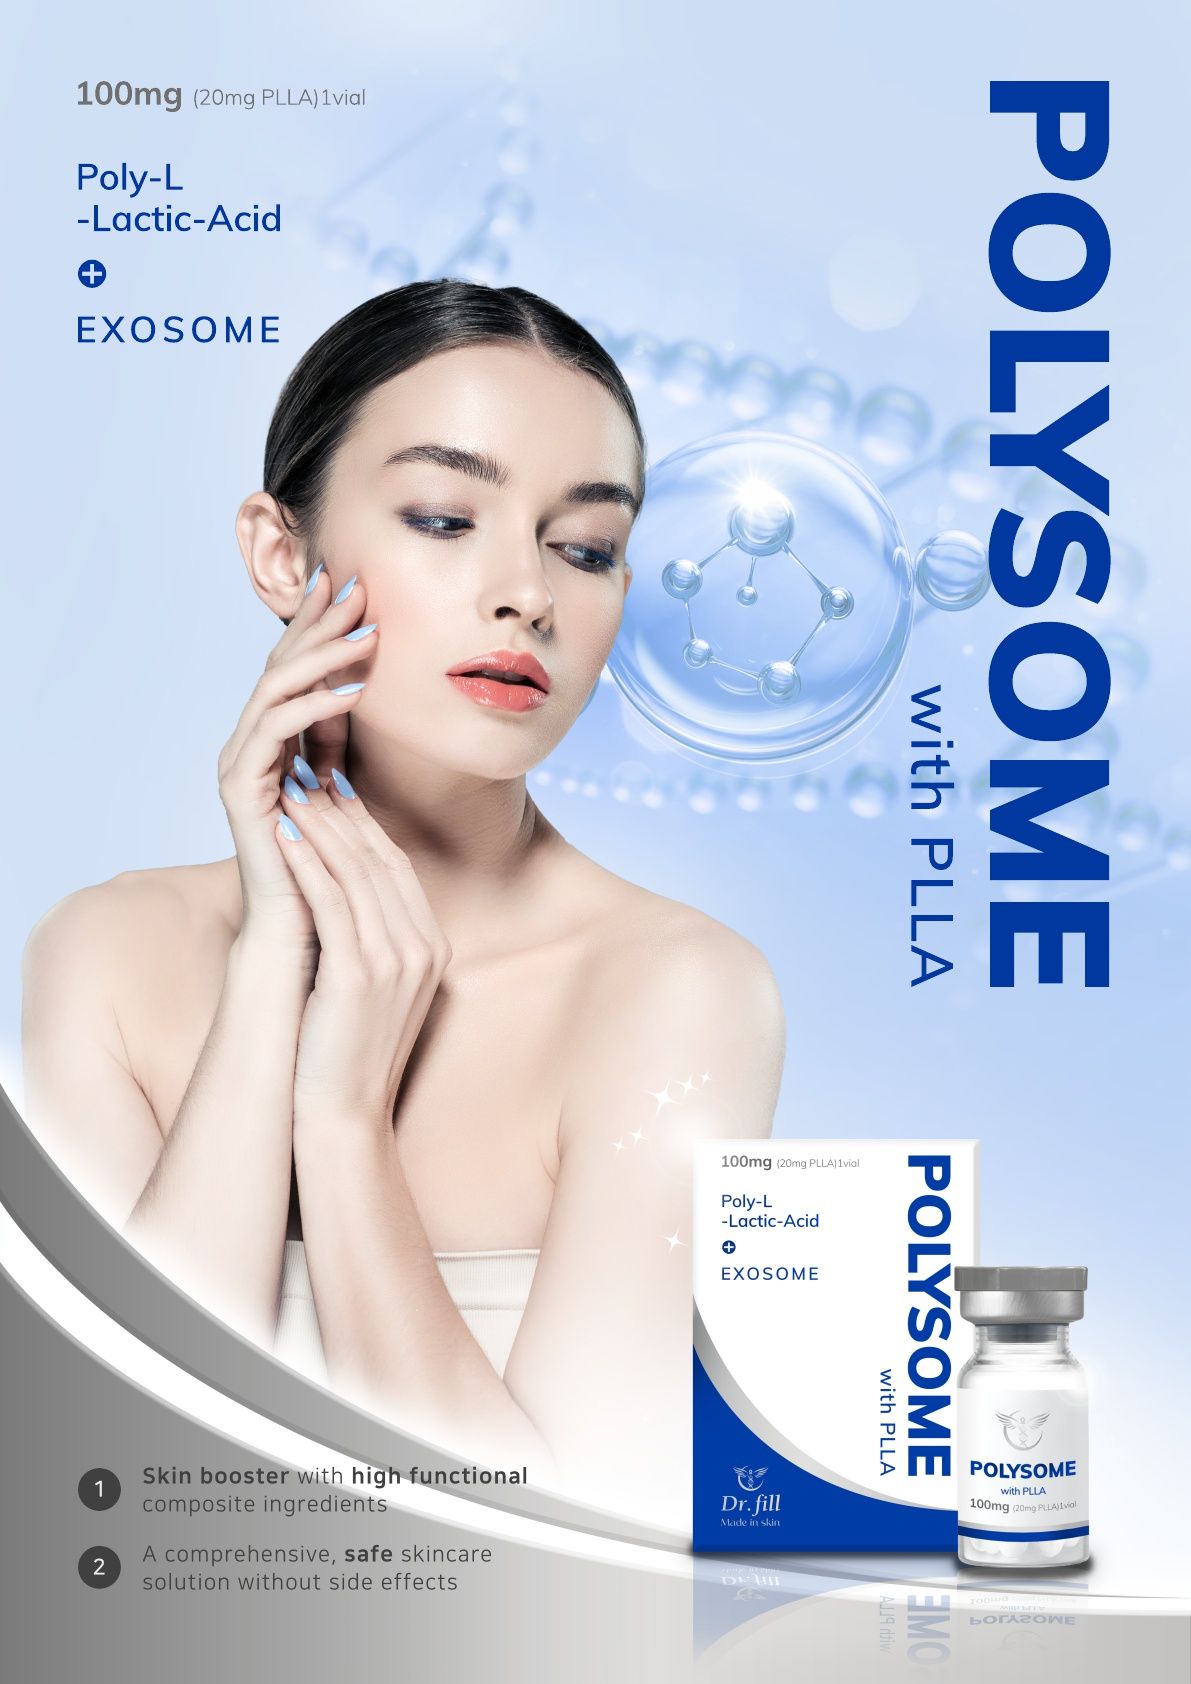 Polysome Poly L Lactic Acid Skin Care Products Plla Filler Powder